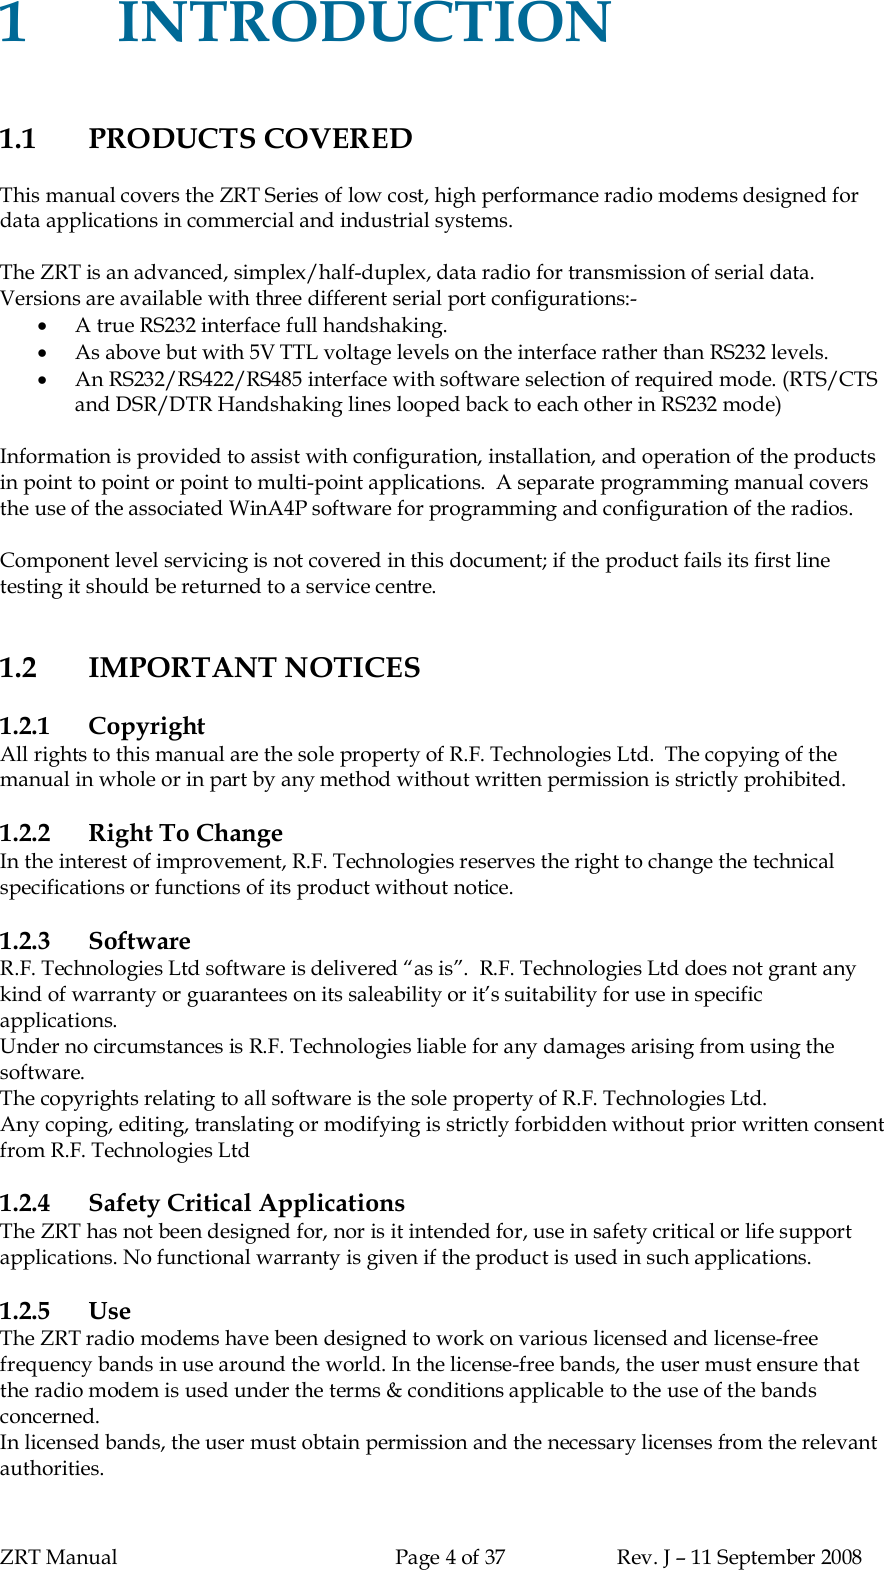 ZRT Manual Page 4 of 37 Rev. J – 11 September 20081INTRODUCTION1.1 PRODUCTS COVEREDThis manual covers the ZRT Series of low cost, high performance radio modems designed fordata applications in commercial and industrial systems.The ZRT is an advanced, simplex/half-duplex, data radio for transmission of serial data.Versions are available with three different serial port configurations:-A true RS232 interface full handshaking.As above but with 5V TTL voltage levels on the interface rather than RS232 levels.An RS232/RS422/RS485 interface with software selection of required mode. (RTS/CTSand DSR/DTR Handshaking lines looped back to each other in RS232 mode)Information is provided to assist with configuration, installation, and operation of the productsin point to point or point to multi-point applications.  A separate programming manual coversthe use of the associated WinA4P software for programming and configuration of the radios.Component level servicing is not covered in this document; if the product fails its first linetesting it should be returned to a service centre.1.2 IMPORTANT NOTICES1.2.1 CopyrightAll rights to this manual are the sole property of R.F. Technologies Ltd.  The copying of themanual in whole or in part by any method without written permission is strictly prohibited.1.2.2 Right To ChangeIn the interest of improvement, R.F. Technologies reserves the right to change the technicalspecifications or functions of its product without notice.1.2.3 SoftwareR.F. Technologies Ltd software is delivered “as is”.  R.F. Technologies Ltd does not grant anykind of warranty or guarantees on its saleability or it’s suitability for use in specificapplications.Under no circumstances is R.F. Technologies liable for any damages arising from using thesoftware.The copyrights relating to all software is the sole property of R.F. Technologies Ltd.Any coping, editing, translating or modifying is strictly forbidden without prior written consentfrom R.F. Technologies Ltd1.2.4 Safety Critical ApplicationsThe ZRT has not been designed for, nor is it intended for, use in safety critical or life supportapplications. No functional warranty is given if the product is used in such applications.1.2.5 UseThe ZRT radio modems have been designed to work on various licensed and license-freefrequency bands in use around the world. In the license-free bands, the user must ensure thatthe radio modem is used under the terms &amp; conditions applicable to the use of the bandsconcerned.In licensed bands, the user must obtain permission and the necessary licenses from the relevantauthorities.